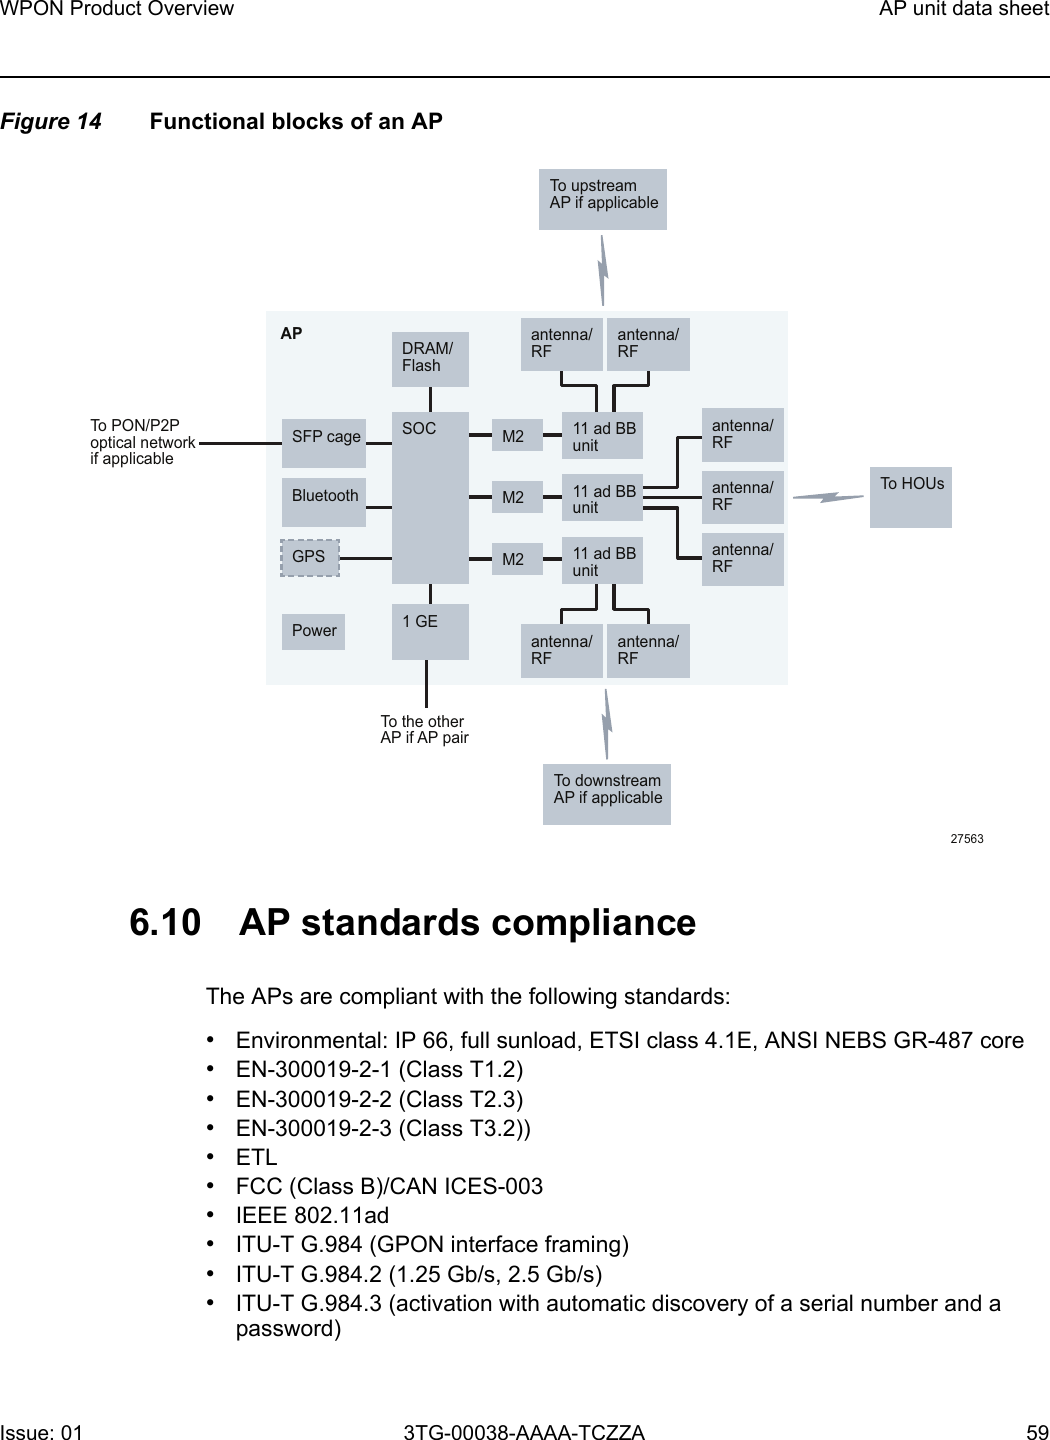 WPON Product Overview AP unit data sheetIssue: 01 3TG-00038-AAAA-TCZZA 59 Figure 14 Functional blocks of an AP6.10 AP standards complianceThe APs are compliant with the following standards: •Environmental: IP 66, full sunload, ETSI class 4.1E, ANSI NEBS GR-487 core•EN-300019-2-1 (Class T1.2)•EN-300019-2-2 (Class T2.3)•EN-300019-2-3 (Class T3.2))•ETL•FCC (Class B)/CAN ICES-003•IEEE 802.11ad•ITU-T G.984 (GPON interface framing)•ITU-T G.984.2 (1.25 Gb/s, 2.5 Gb/s)•ITU-T G.984.3 (activation with automatic discovery of a serial number and a password)To HOUsTo PON/P2Poptical networkif applicableM2SFP cageBluetoothGPSPowerM2M2antenna/RFantenna/RFantenna/RFantenna/RFantenna/RFTo upstreamAP if applicableTo downstreamAP if applicableSOCDRAM/FlashTo the otherAP if AP pair11 ad BBunit11 ad BBunitAP antenna/RFantenna/RF11 ad BBunit1 GE27563